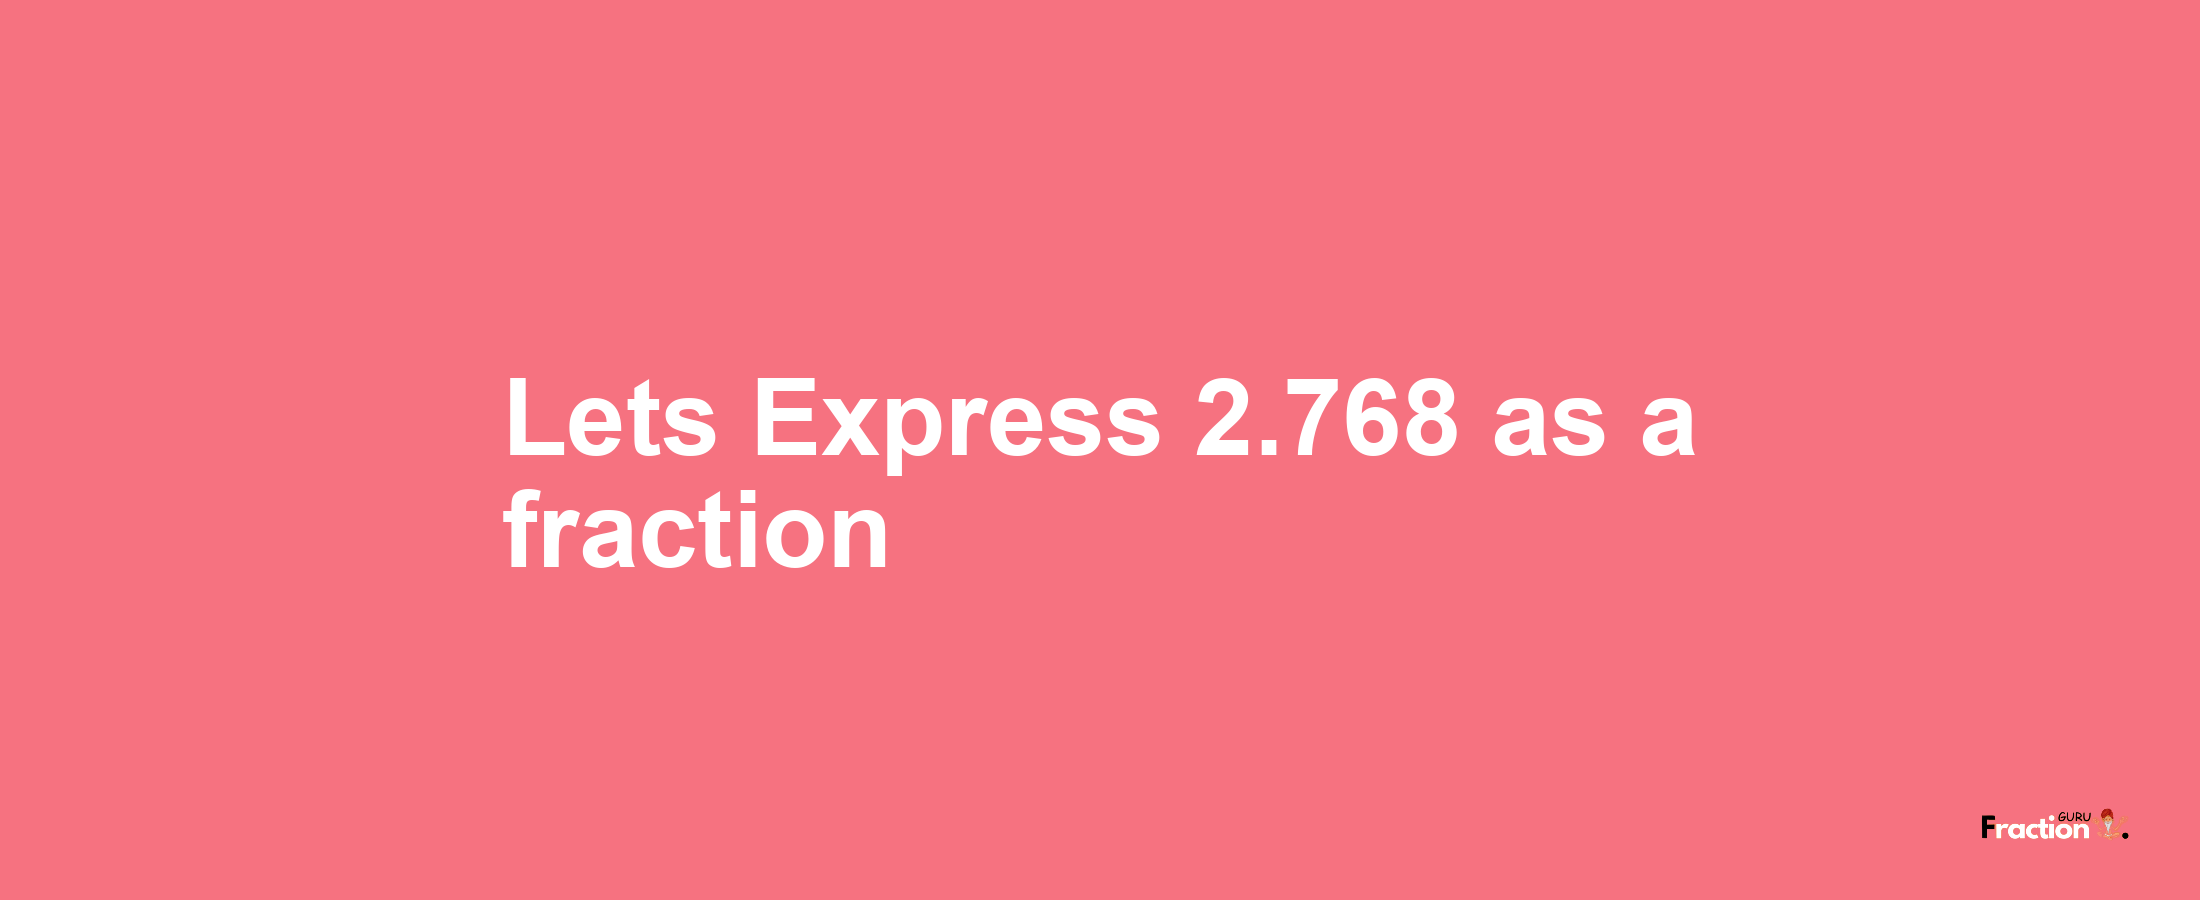 Lets Express 2.768 as afraction